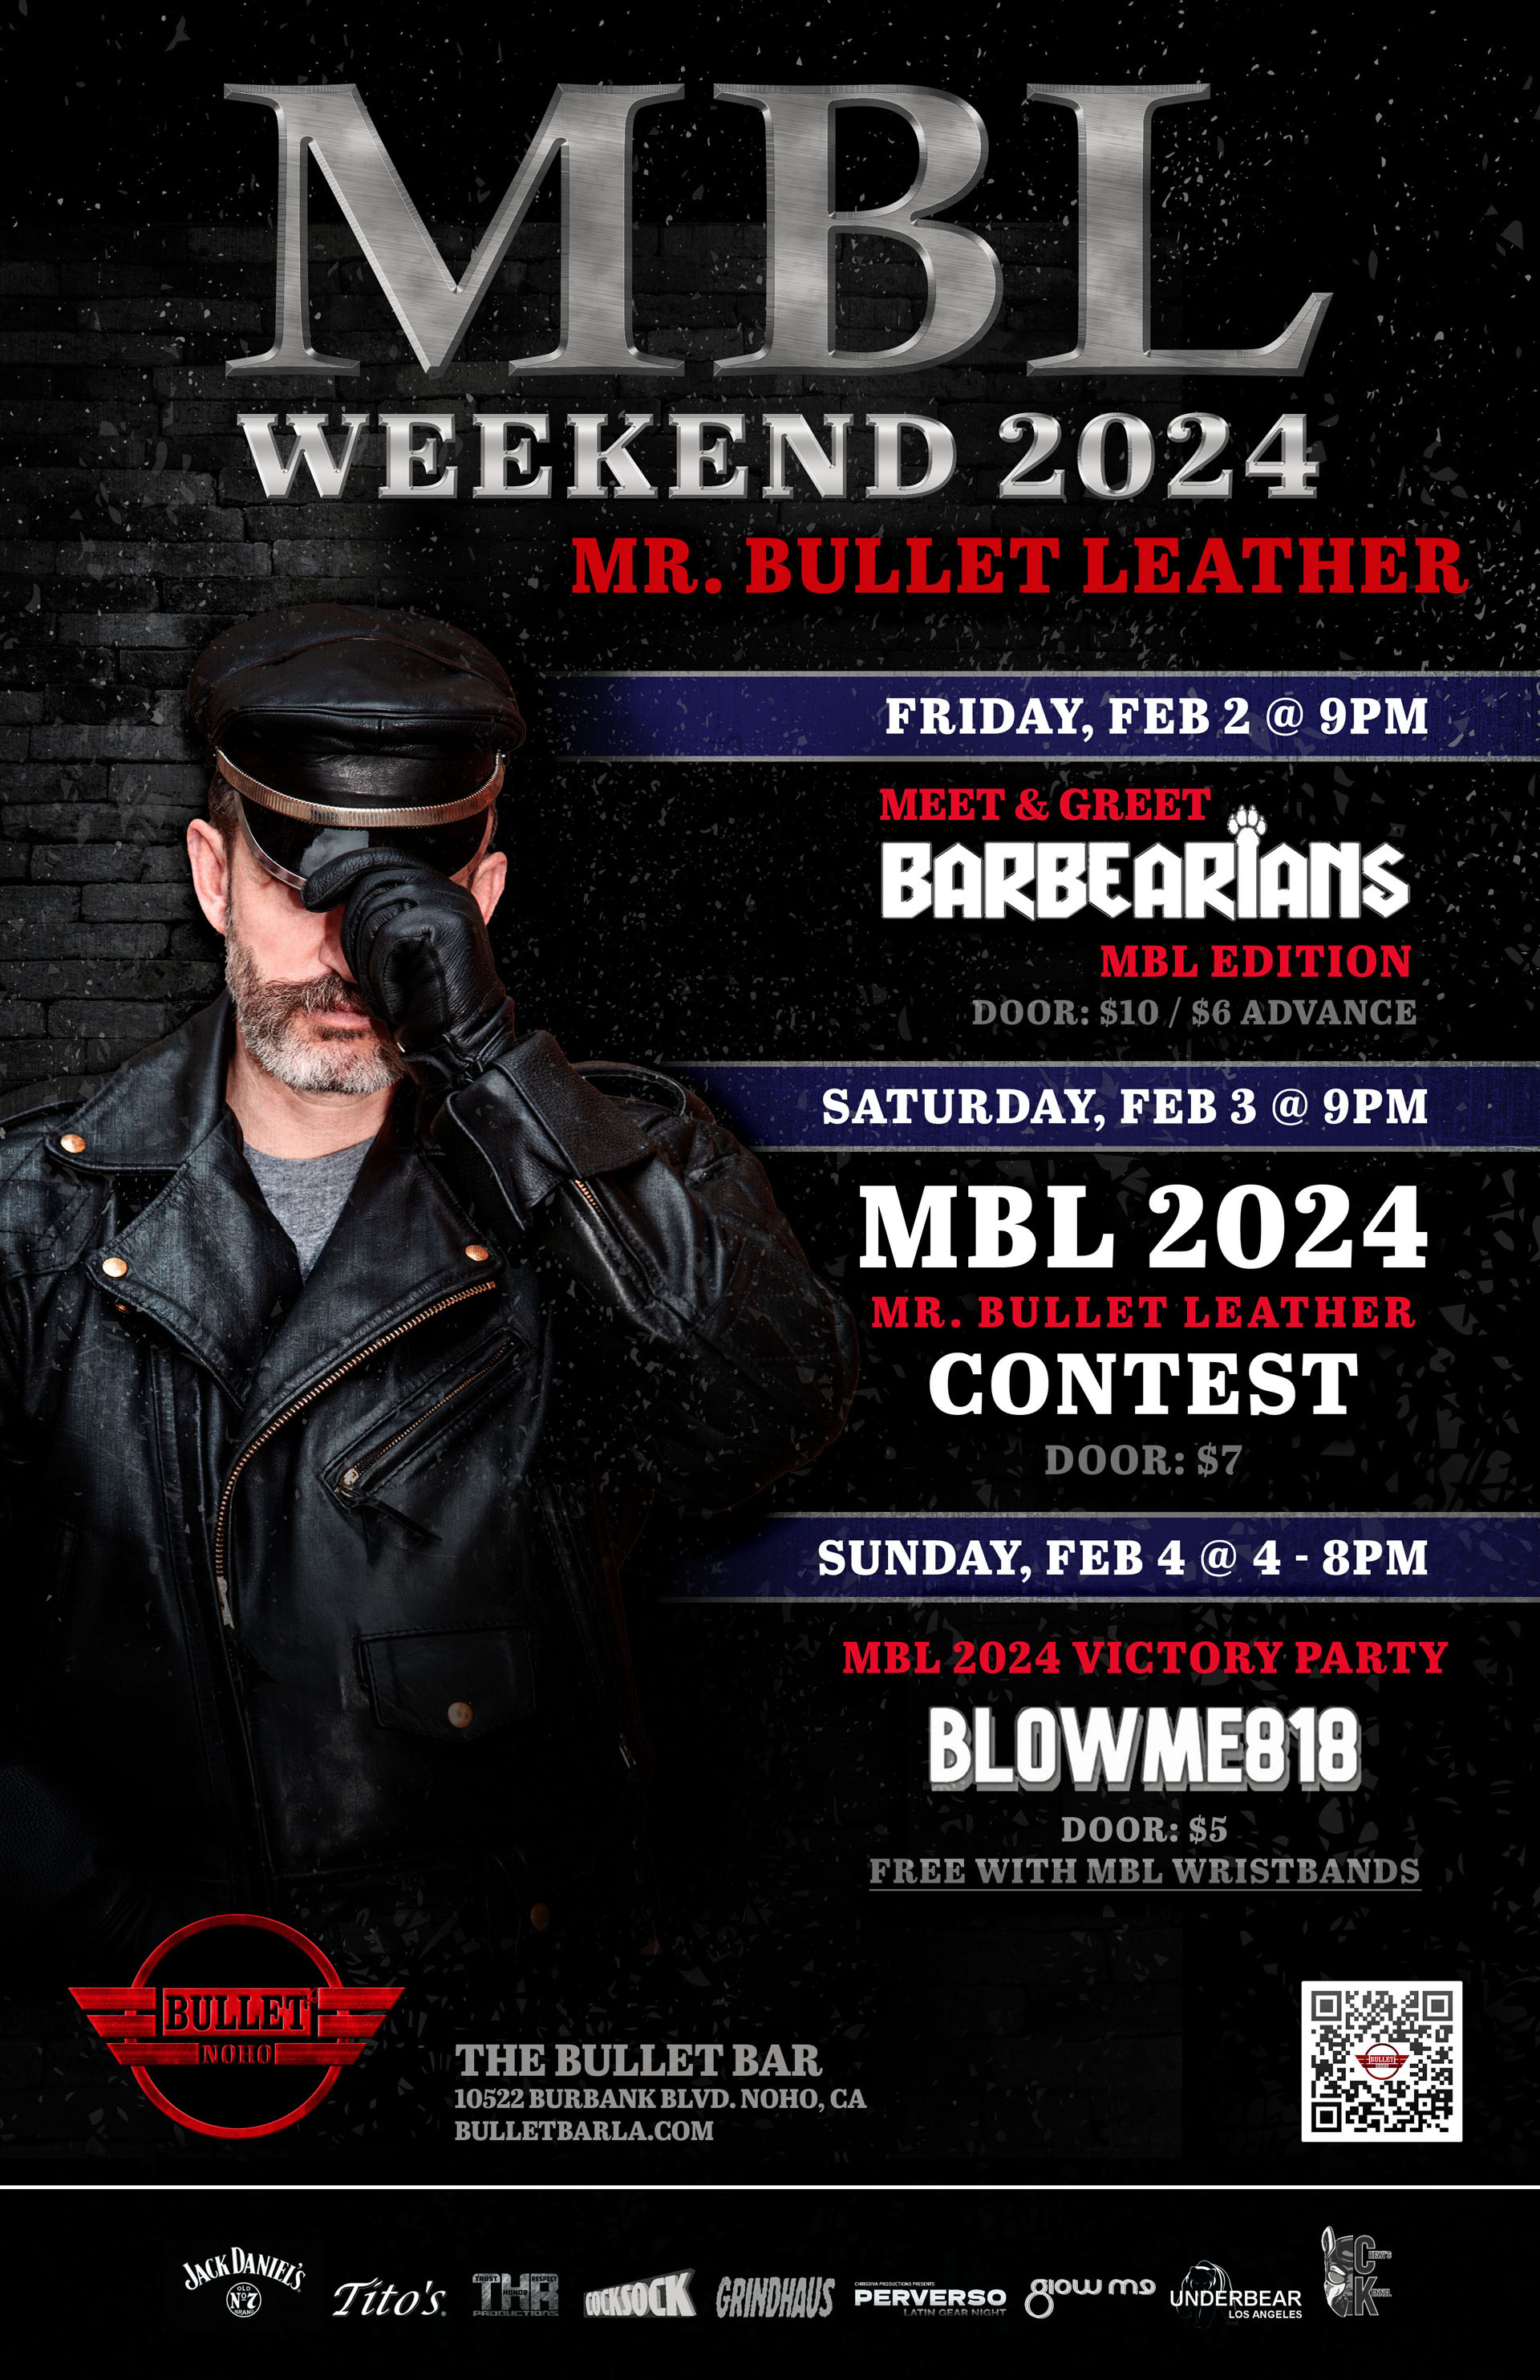 MBL WEEKEND 2024--MR. BULLET LEATHER: Friday, 02/02/24 through Sunday, 02/04/24